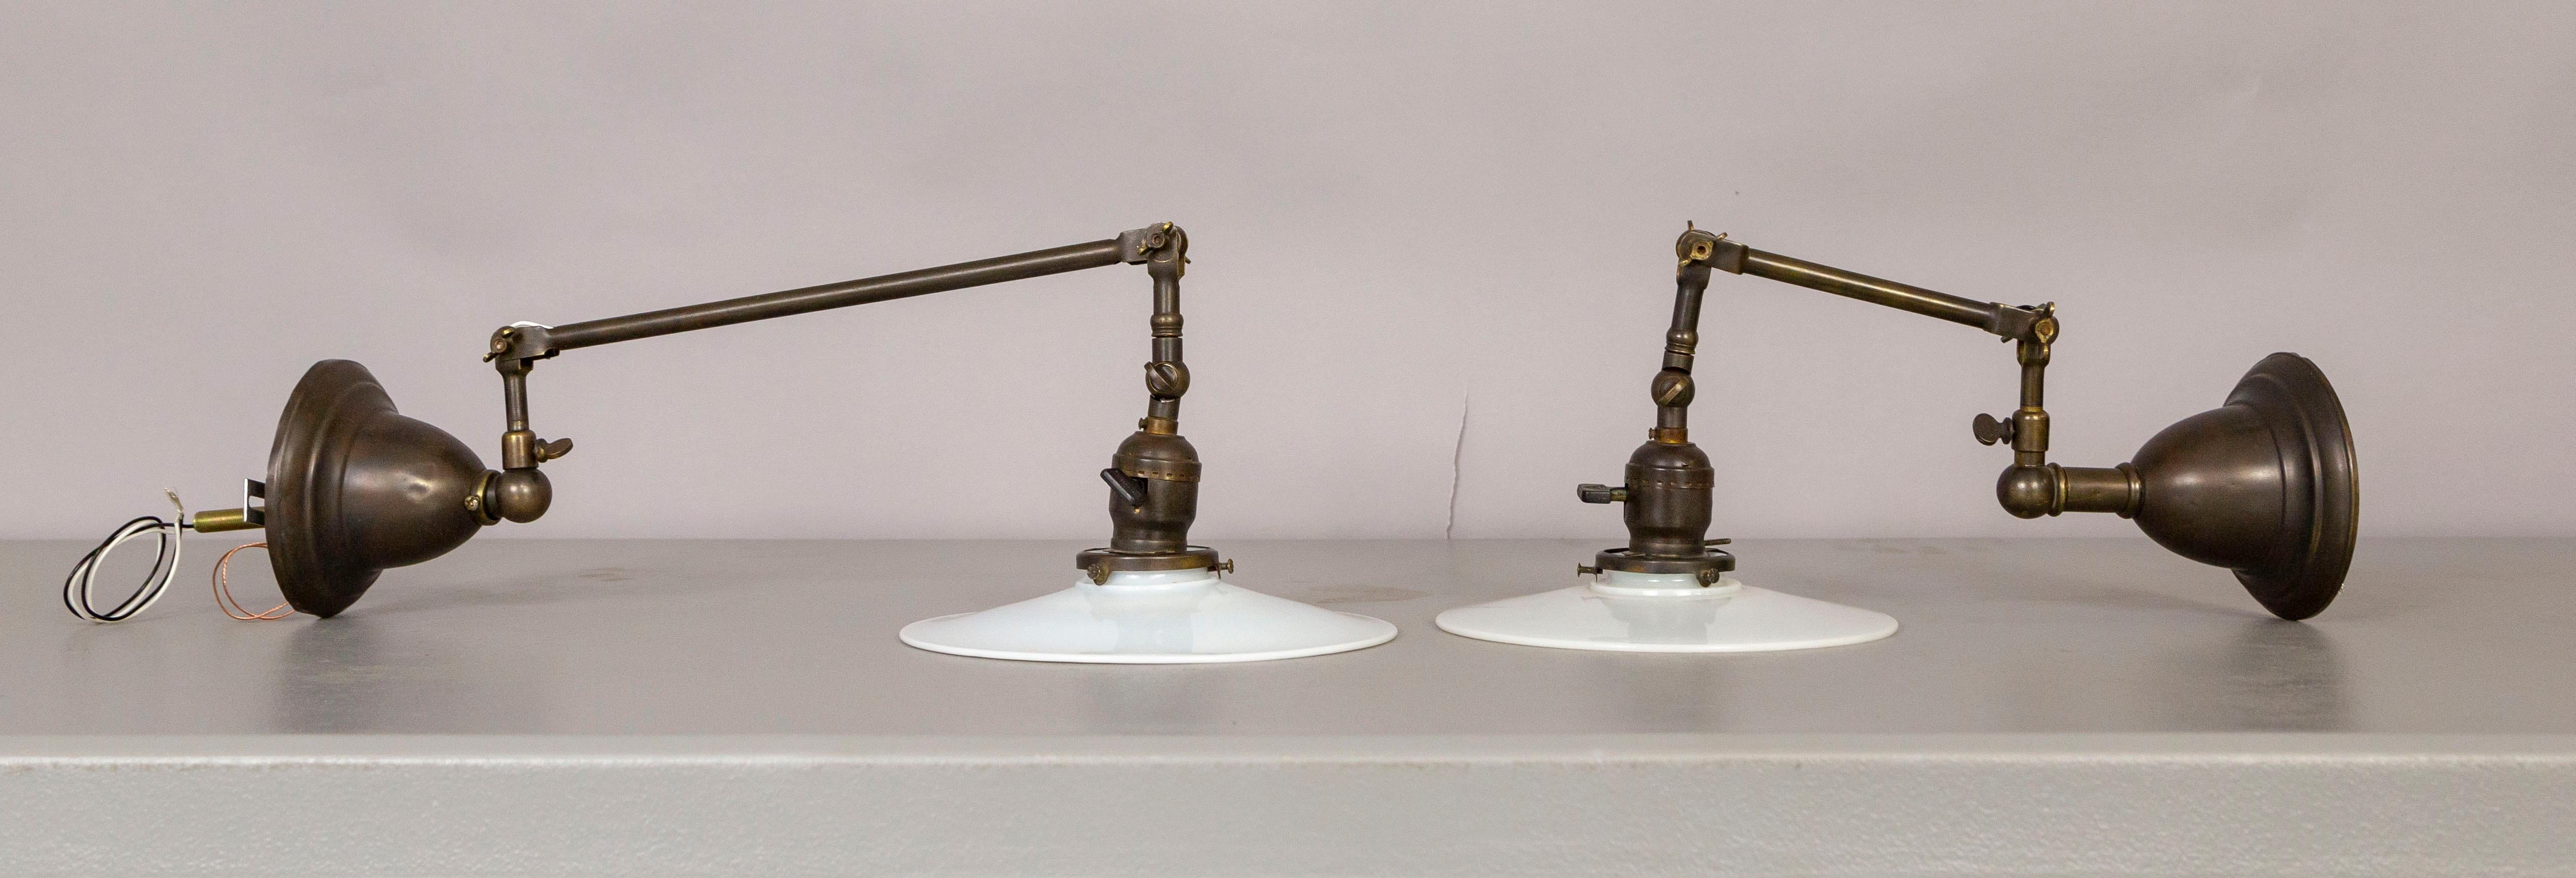 A pair of brass wall sconces with an oil-rubbed bronze finish from the late 1800s, originally gas, now electrified. They articulate in multiple places and make a perfect task light. With milk glass, disk shades, and attractive knob and screw